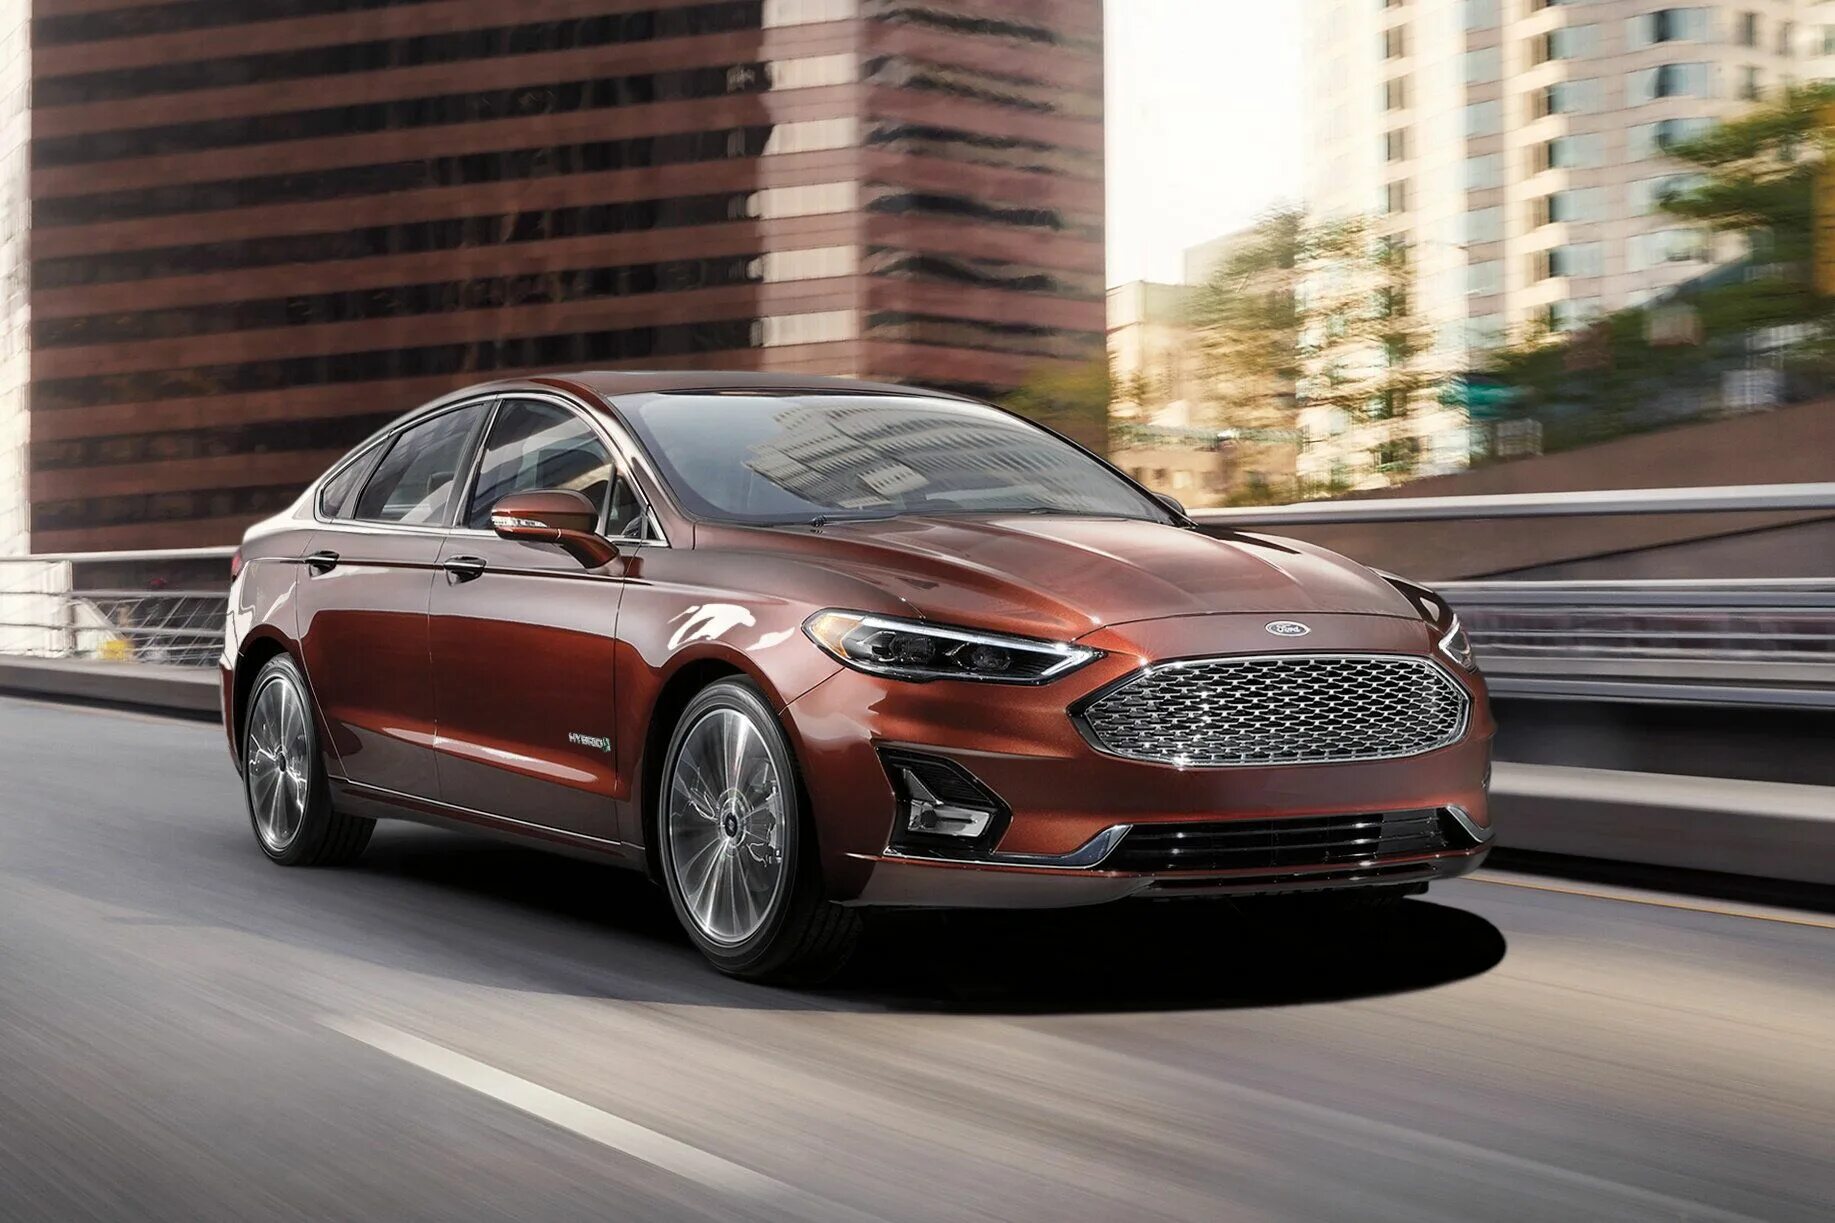 Ford Fusion 2020. Форд Fusion 2020. Ford Mondeo 2020. Ford Fusion 2021.